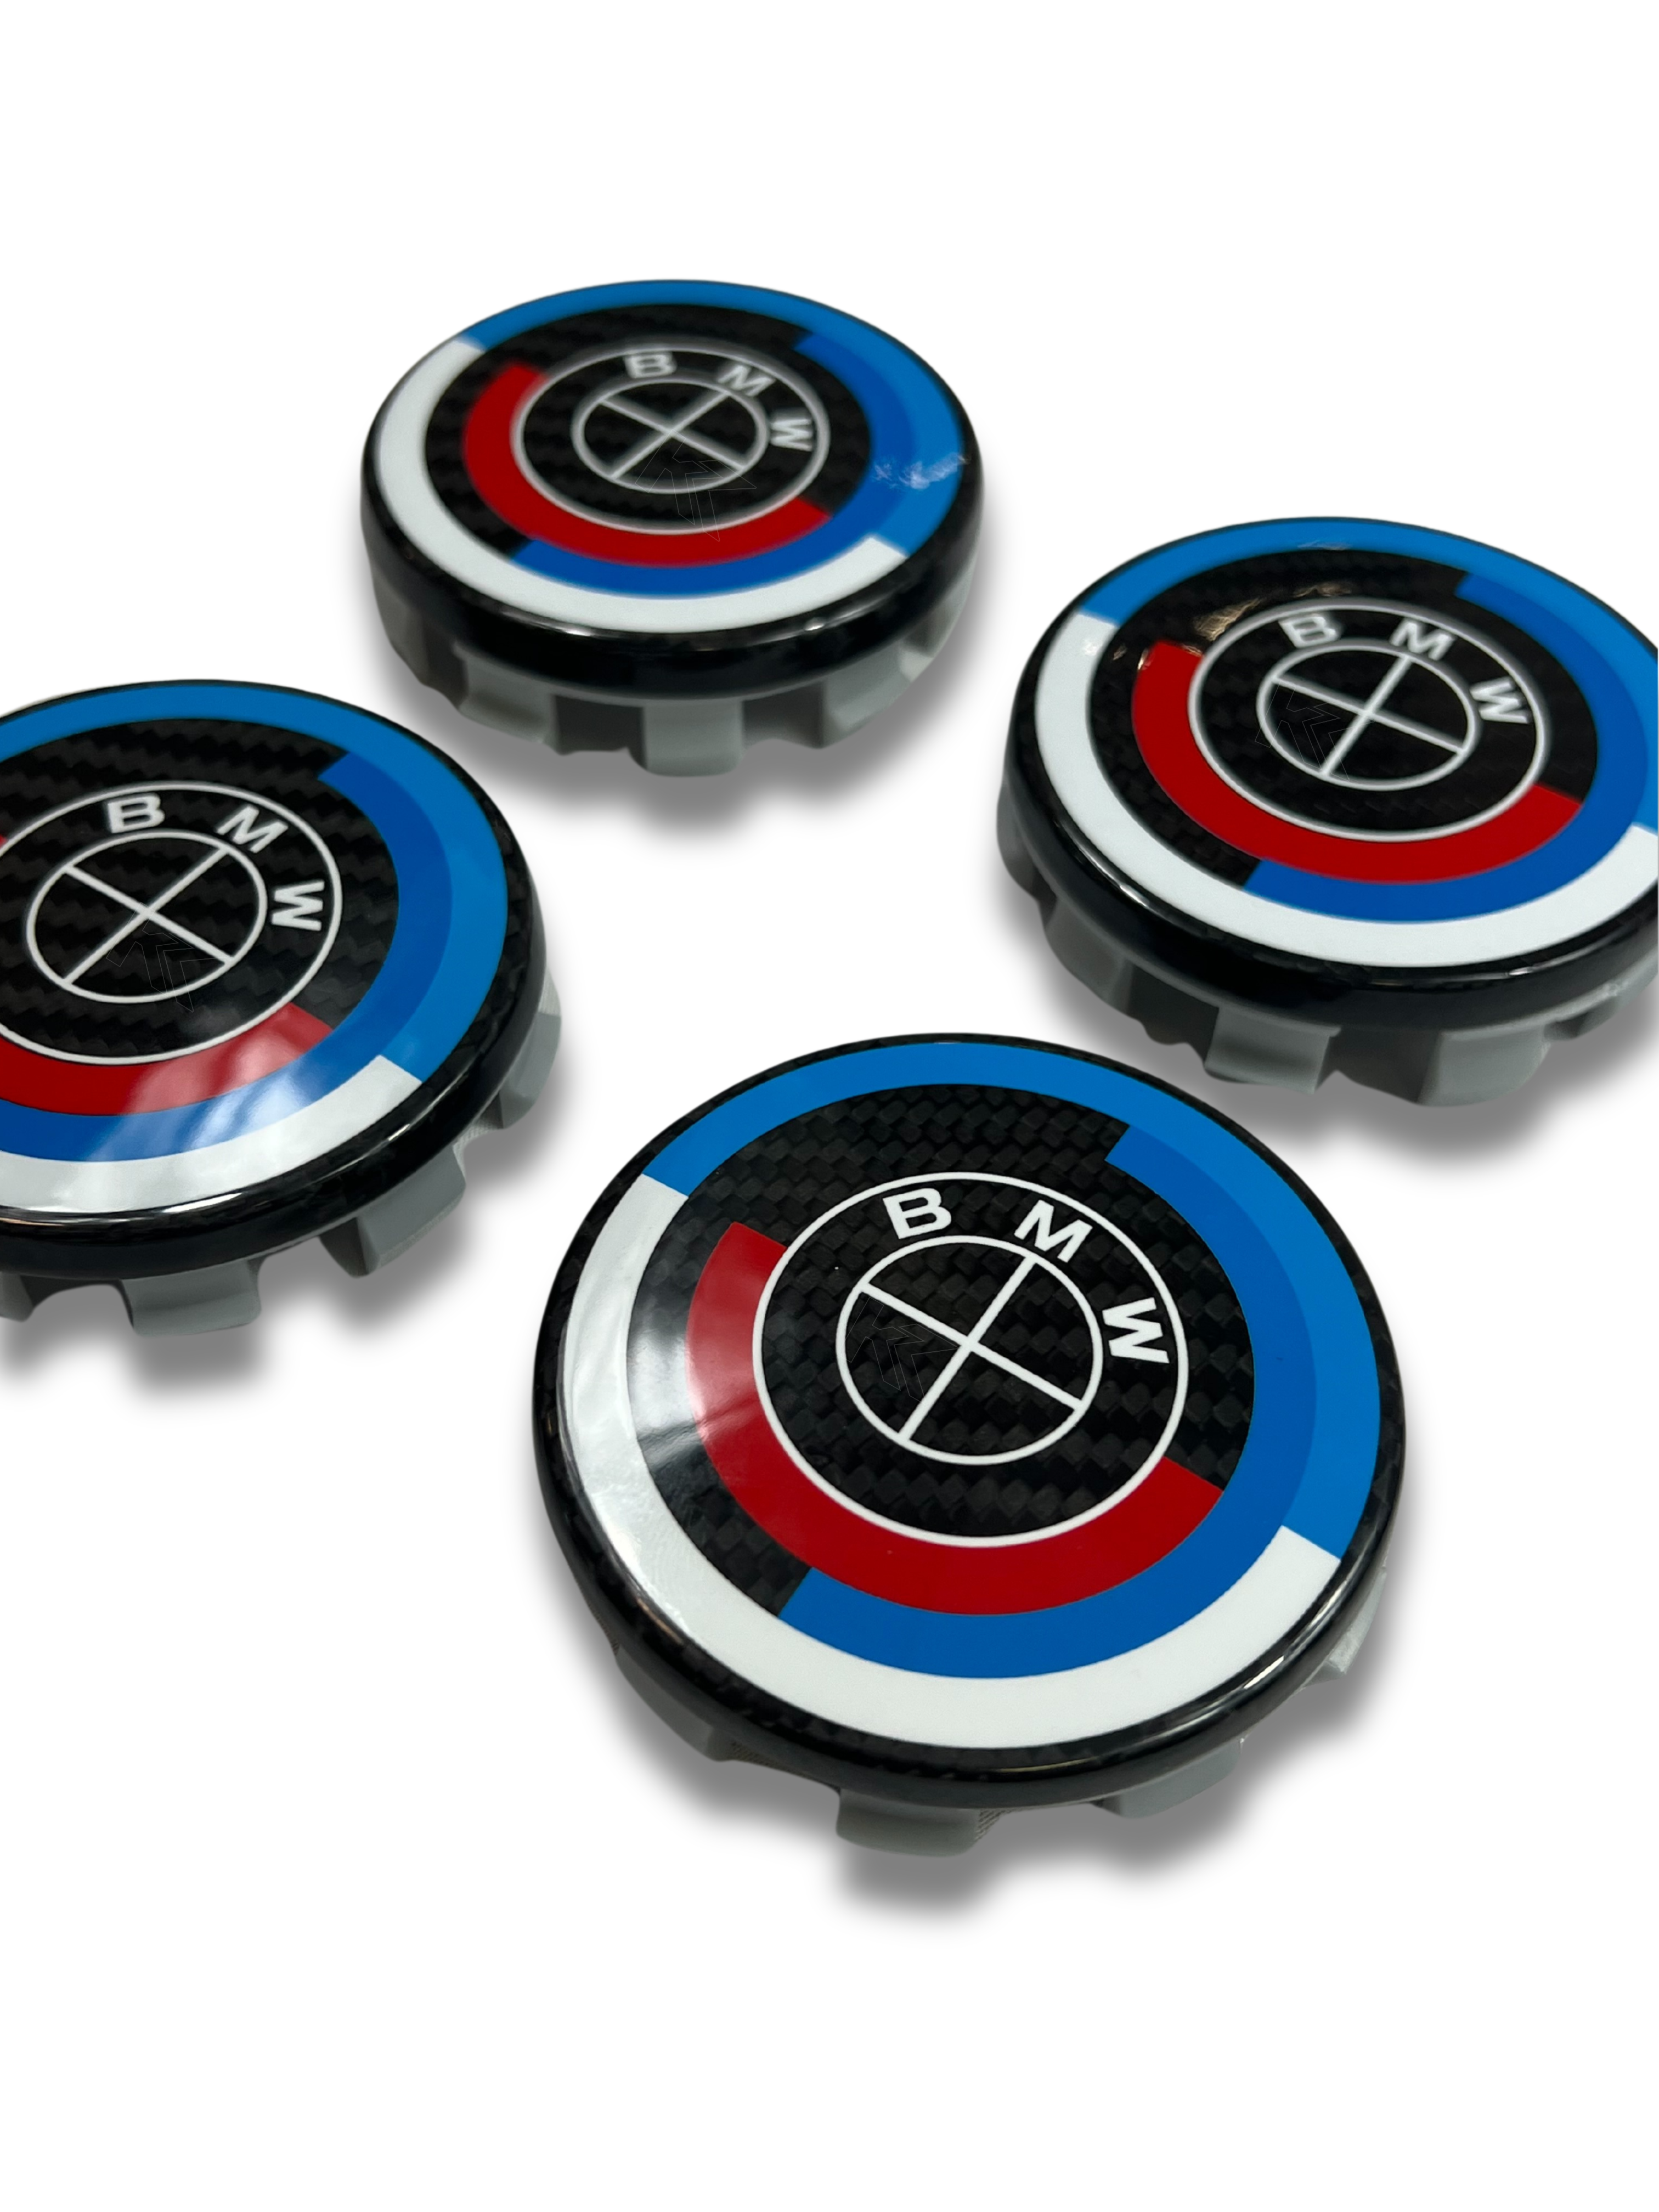 BMW Wheel Caps - Full Carbon 50th Anniversary Style